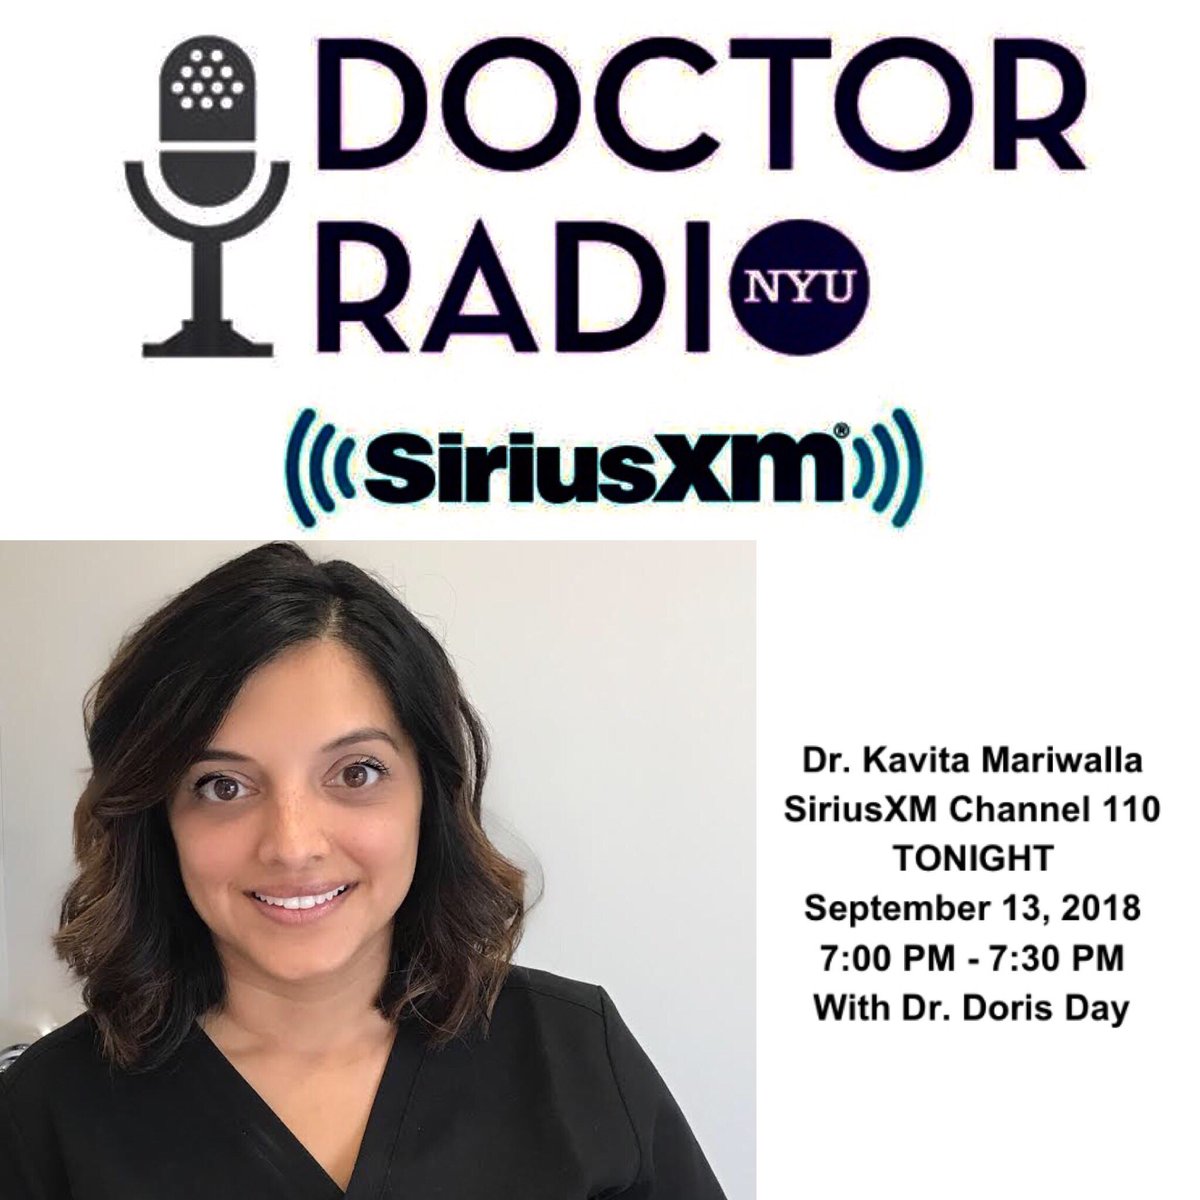 Be sure to tune into Doctor Radio tonight at 7:00PM to hear Dr. Mariwalla discuss skincare fads with Dr. Doris Day!
-
-
-
#DoctorRadio #DoctorRadioSiriusXM #DoctorRadioShow #Sirius #SiriusXM #SiriusXMRadio #NYULangone #DrDorisDay